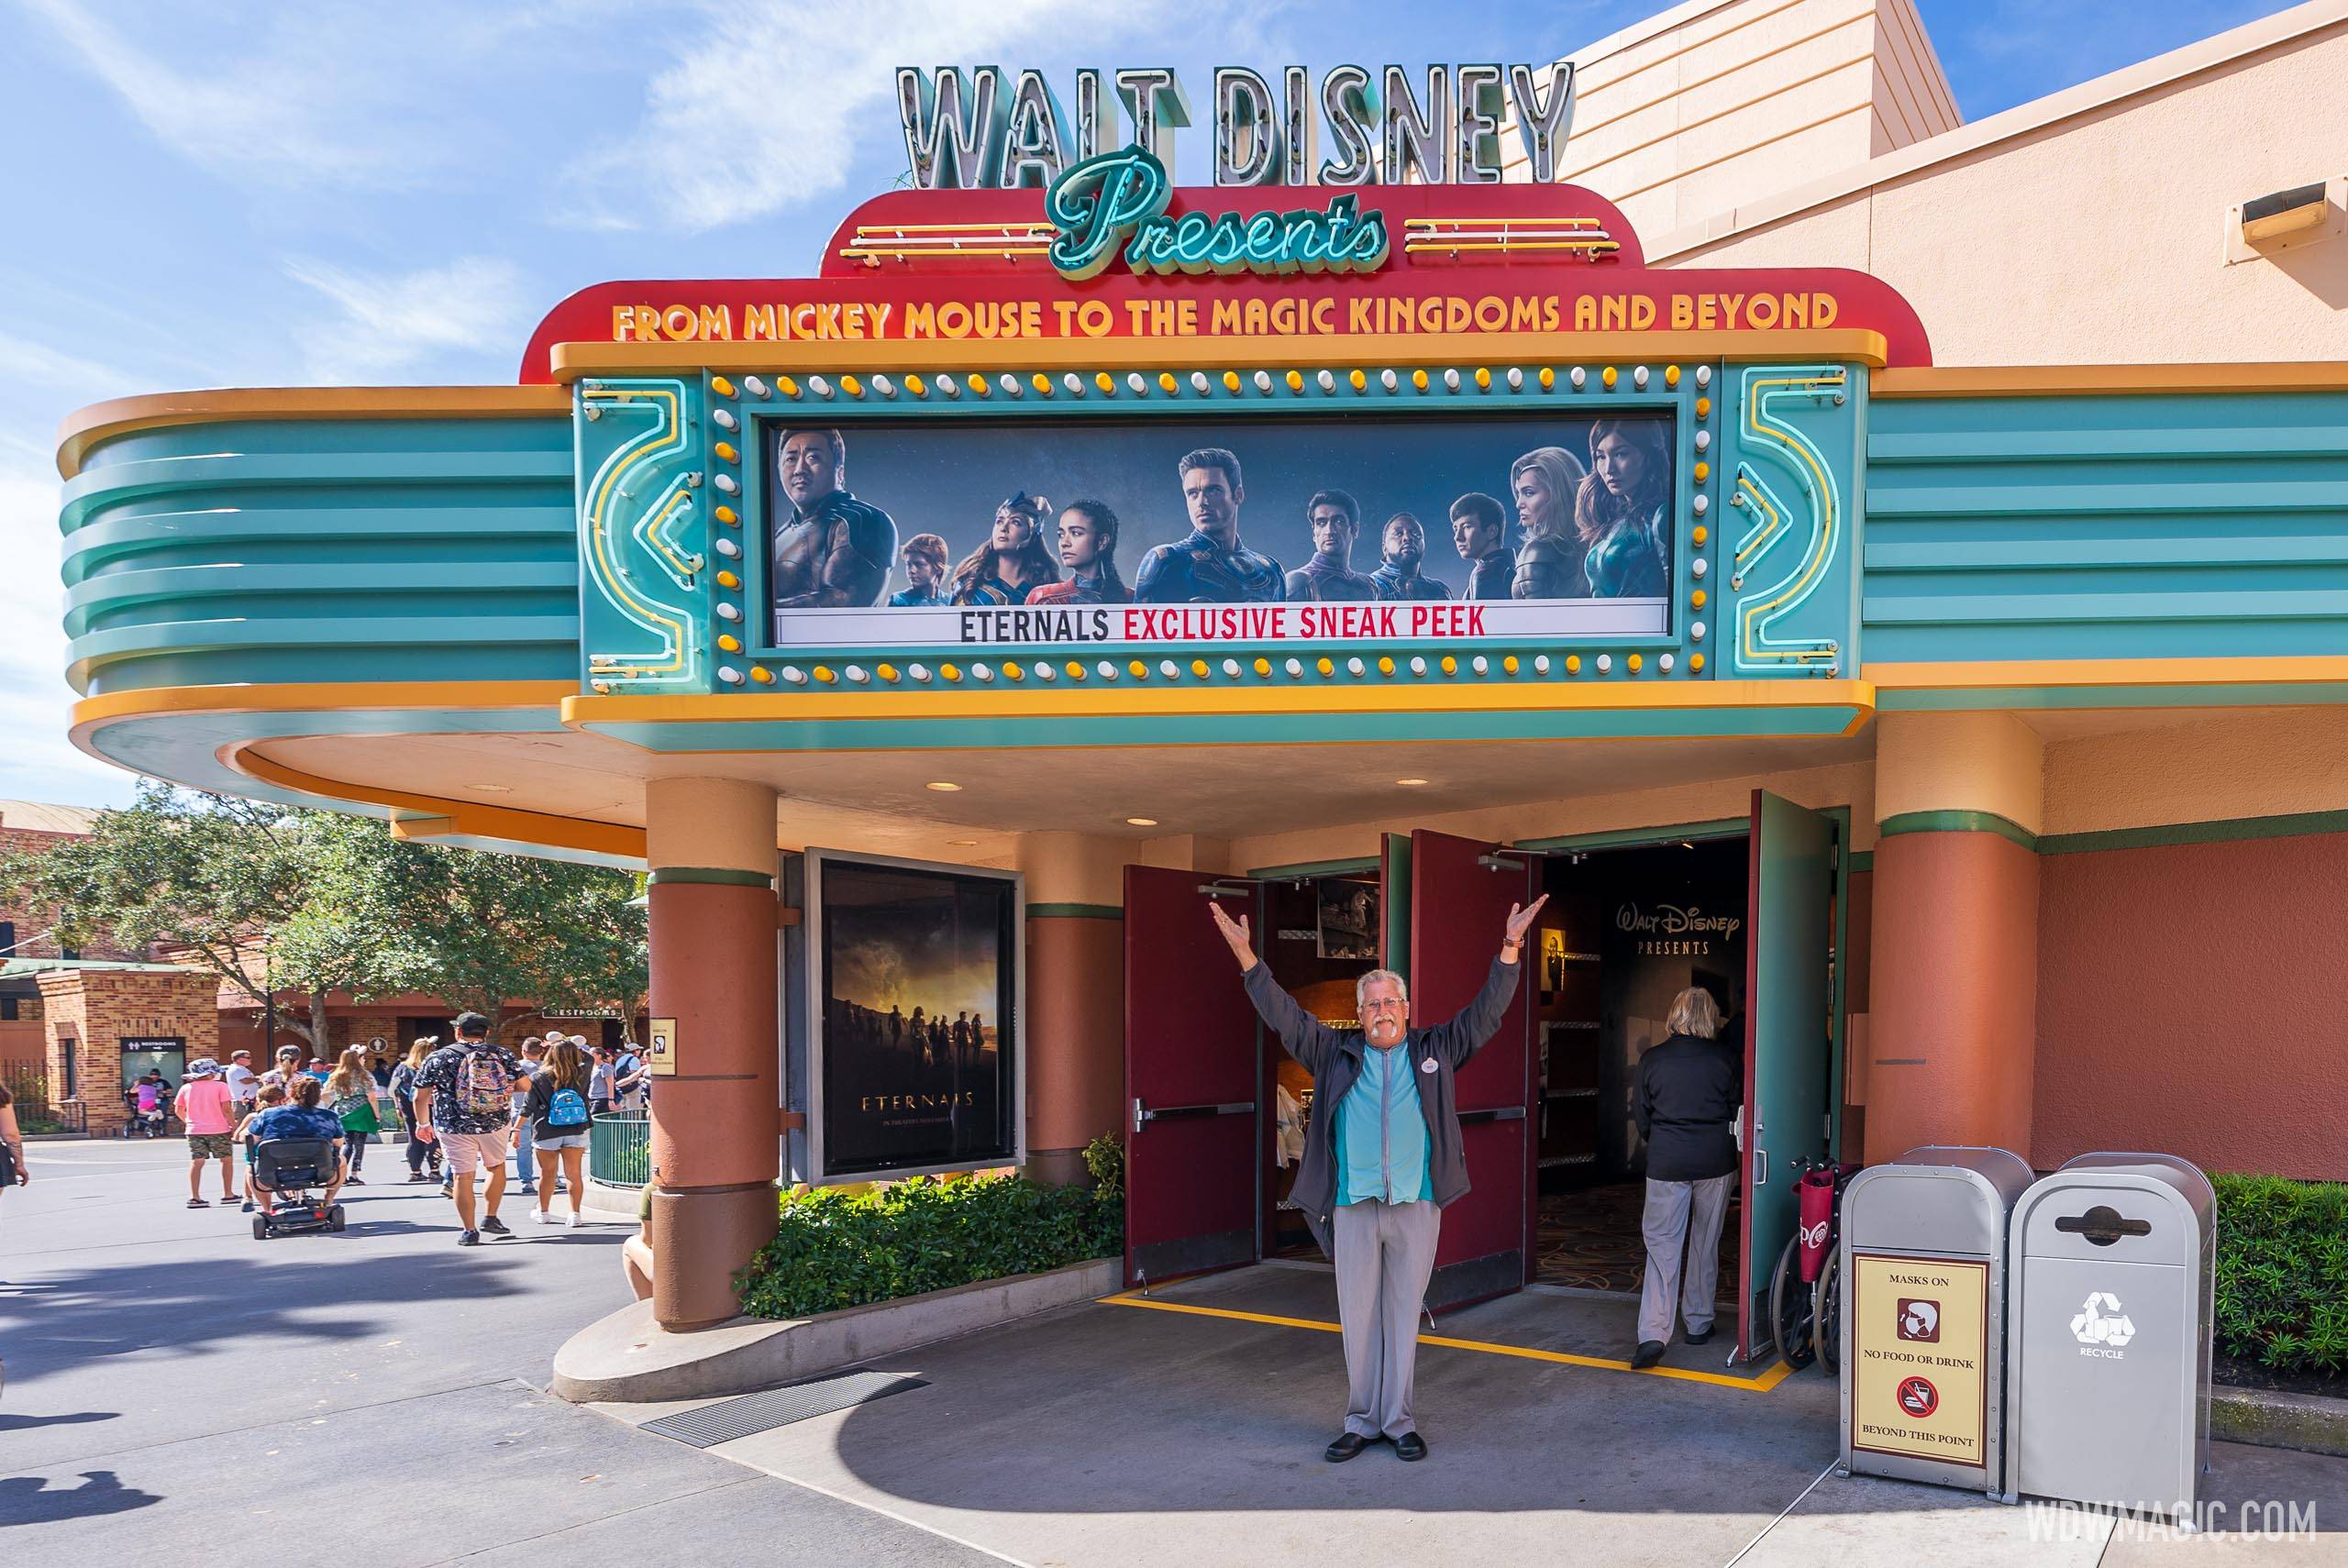 Walt Disney Presents will welcome back character meet and greets April 18